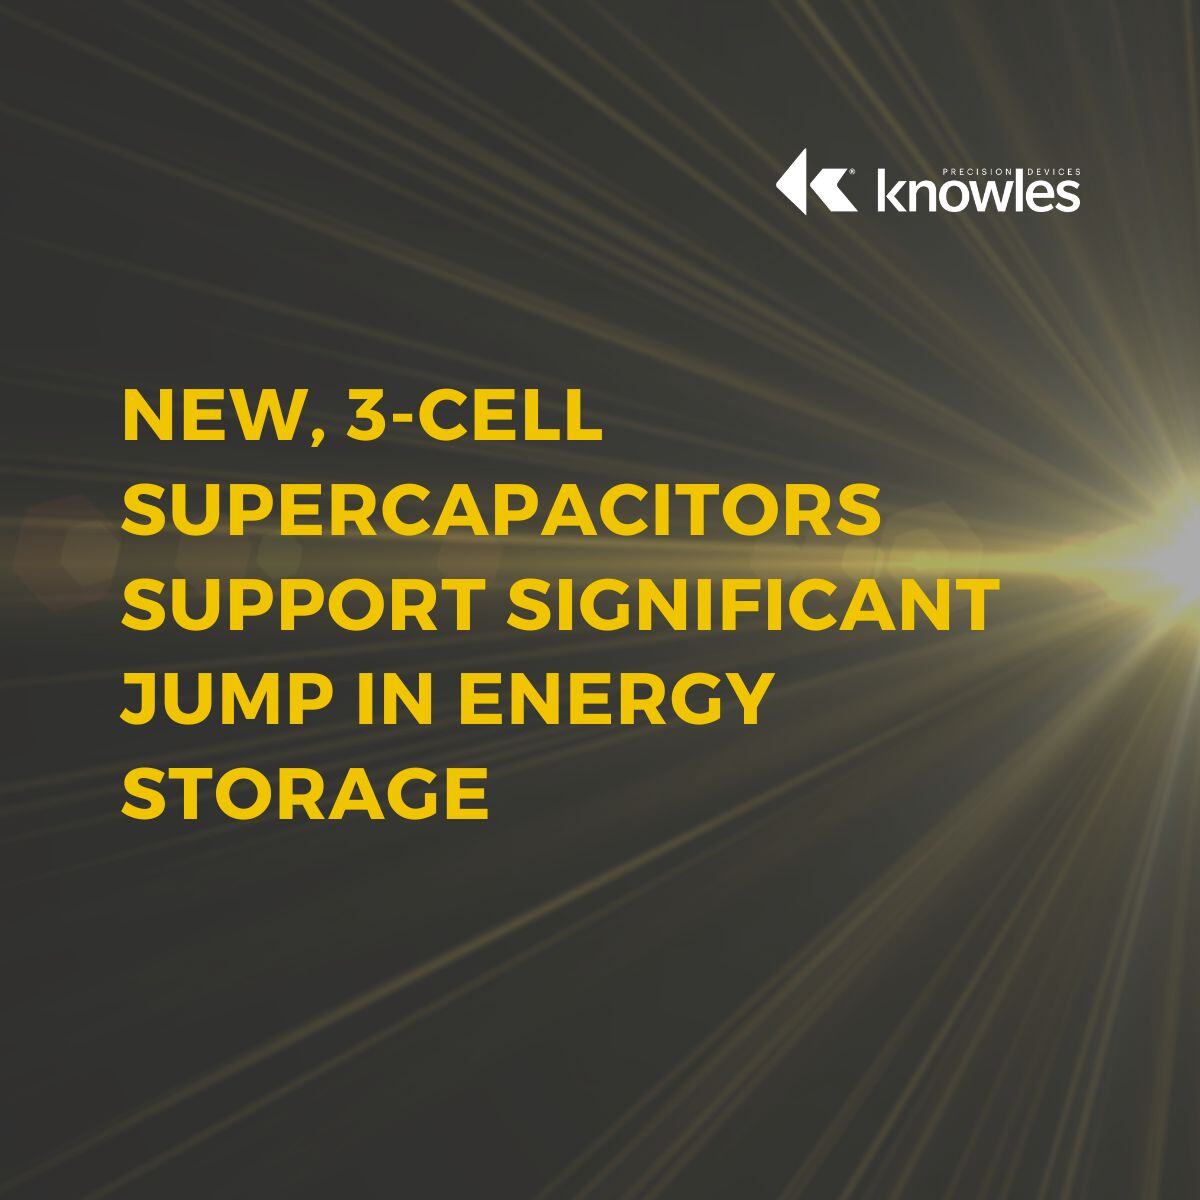 New, 3-Cell Supercapacitors Support Significant Jump in Energy Storage